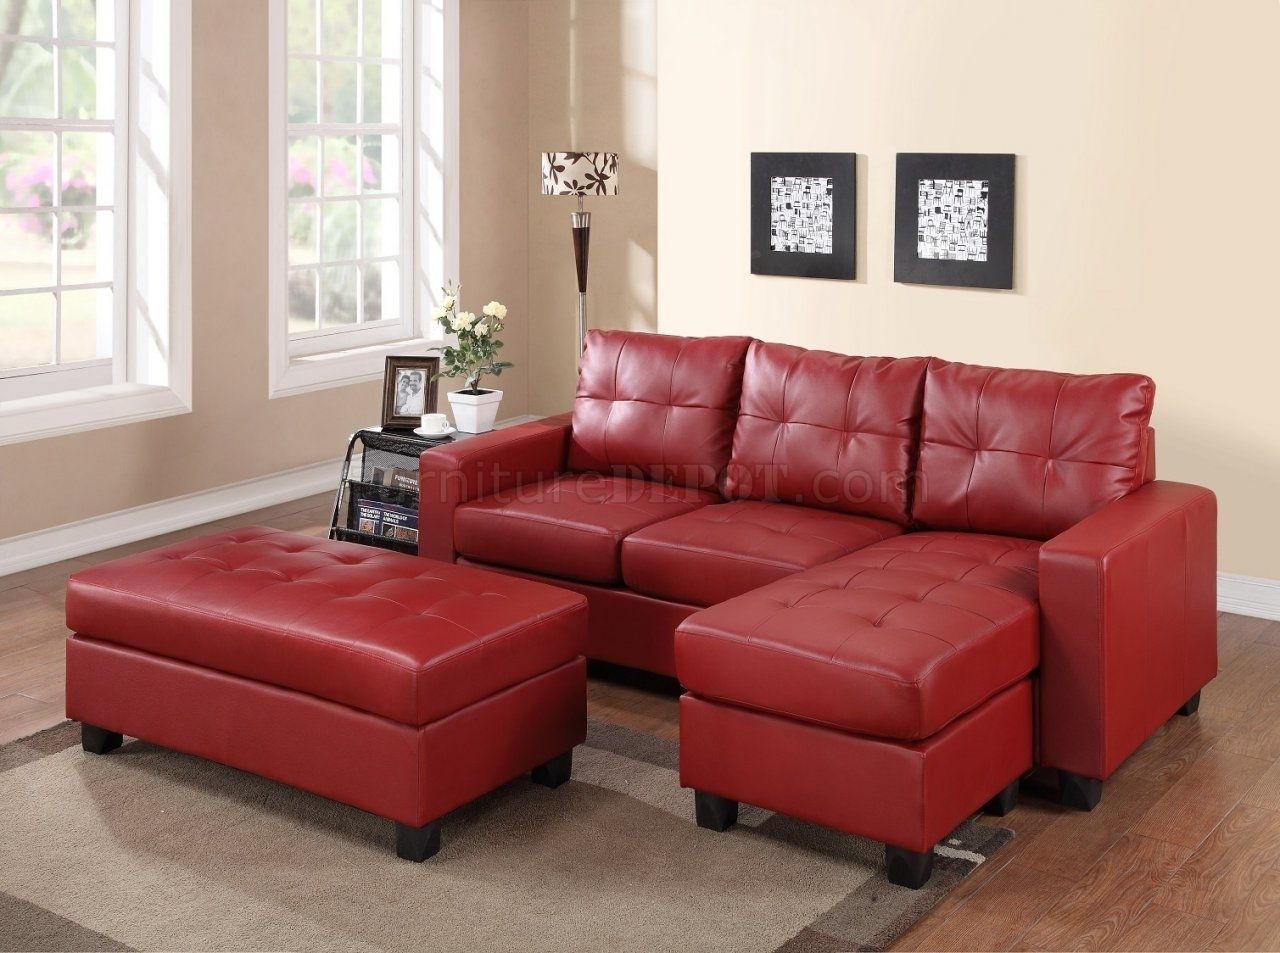 Sofa : Fabric Sectional Sofas Tan Reclining Sectional Red Fabric With Red Leather Sectional Couches (View 9 of 15)